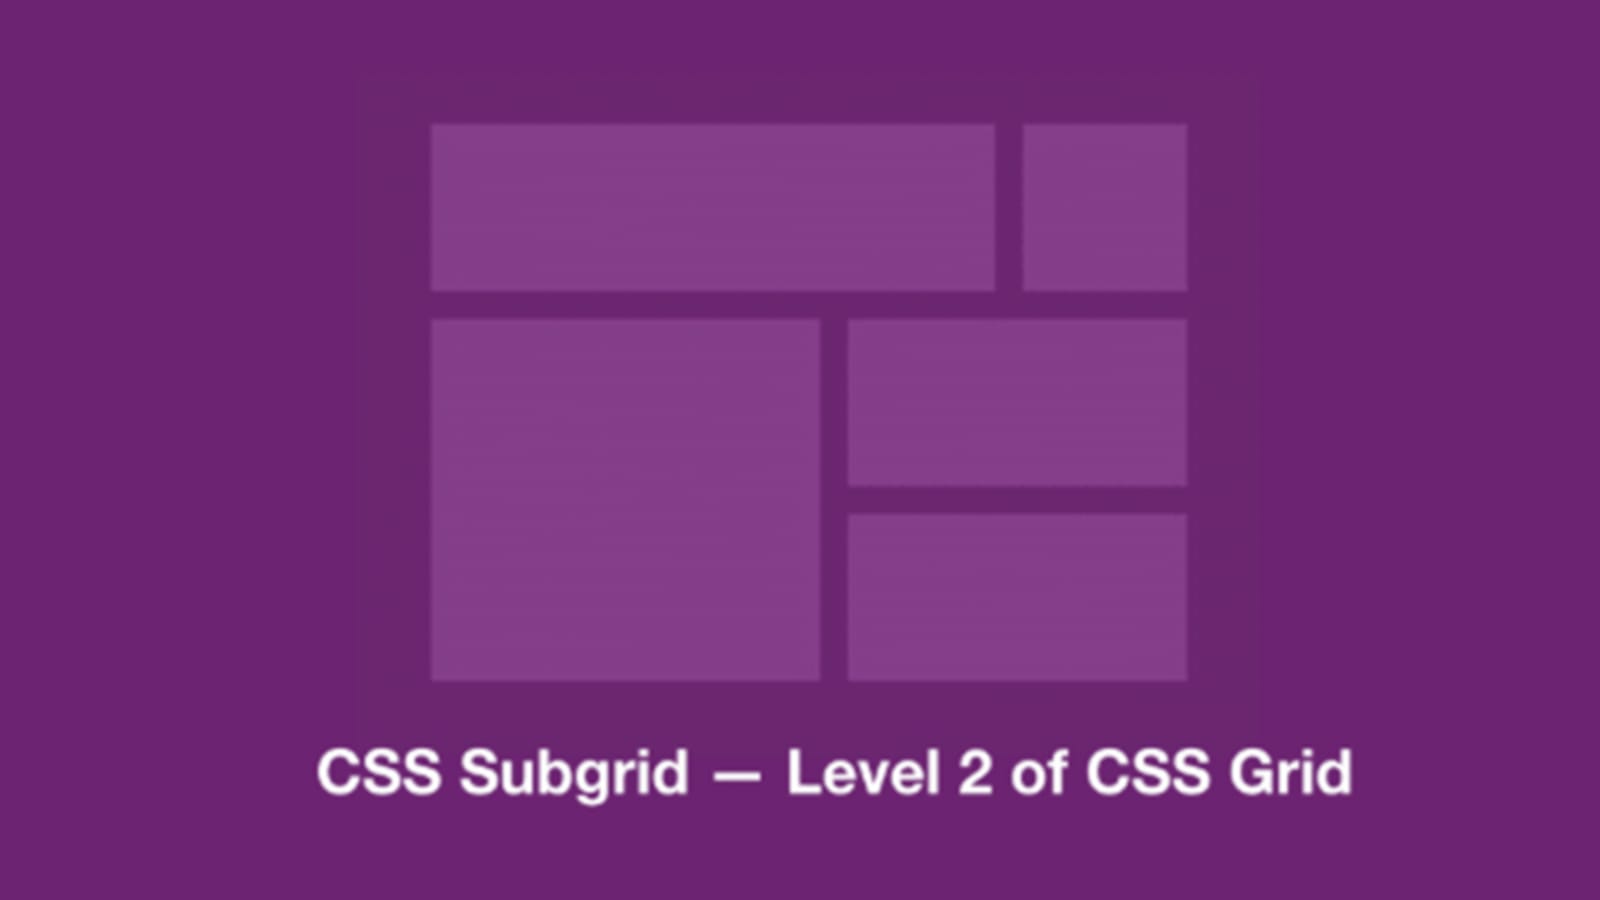 What should I learn for as a new developer, a CSS grid layout Module or  Flexbox? - Quora